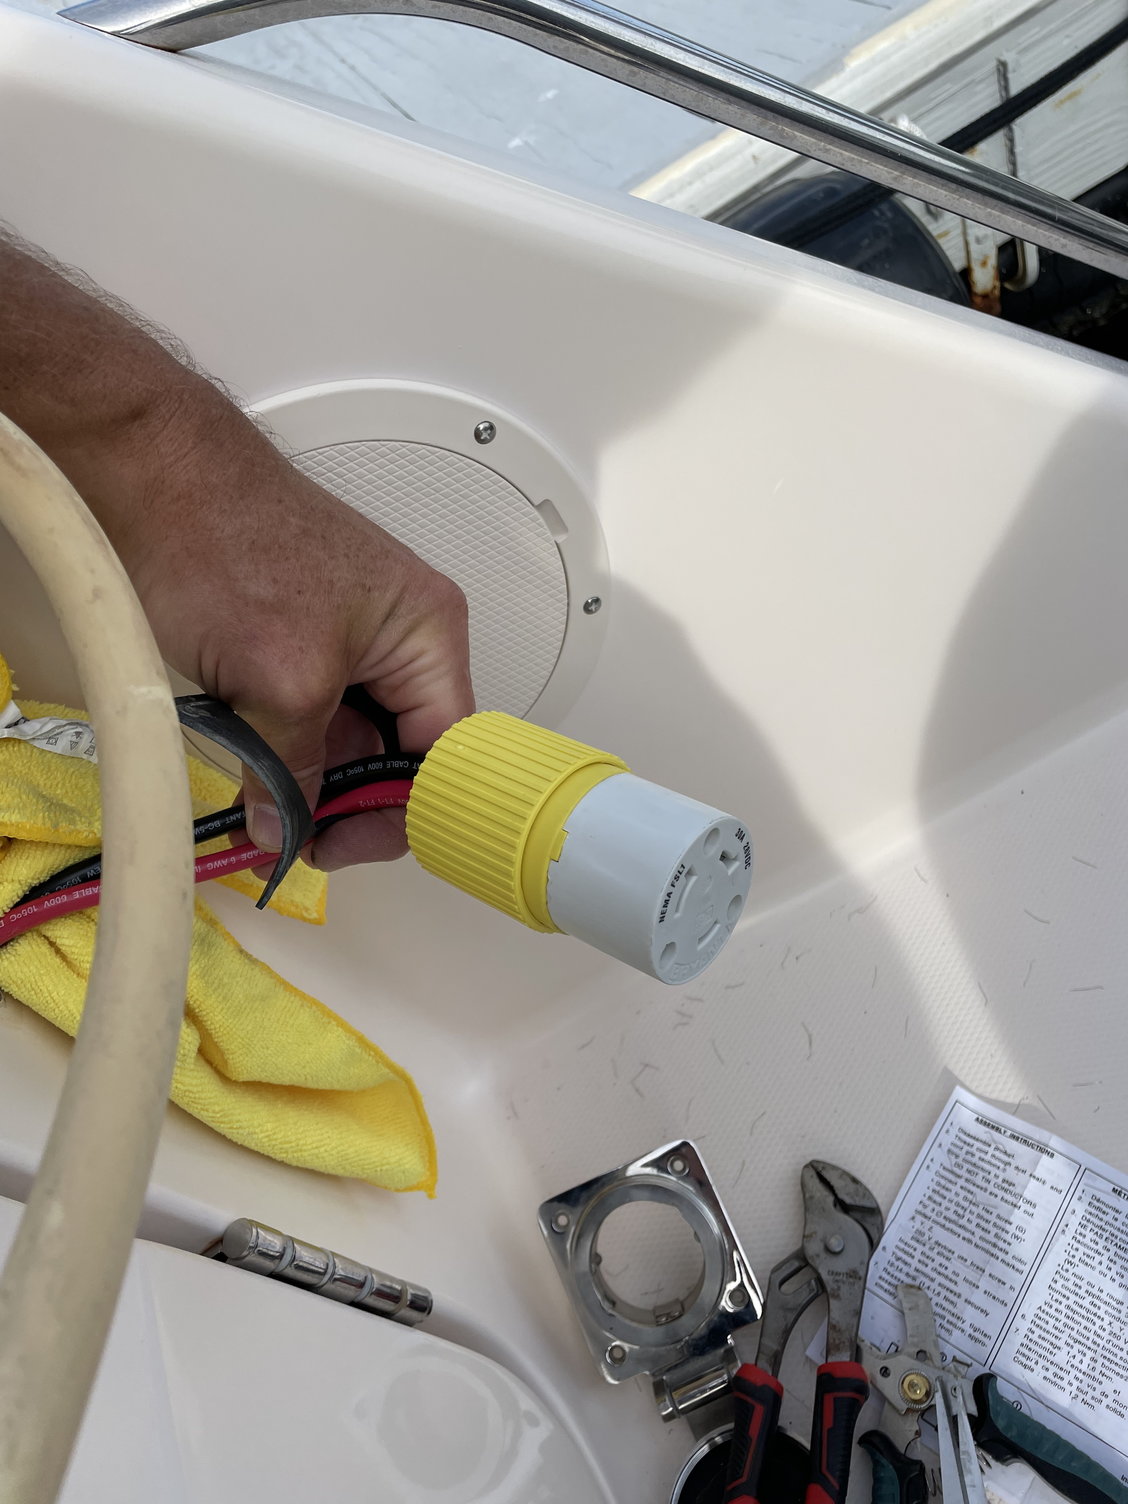 Installed 12V plug for Electric Reel? - The Hull Truth - Boating